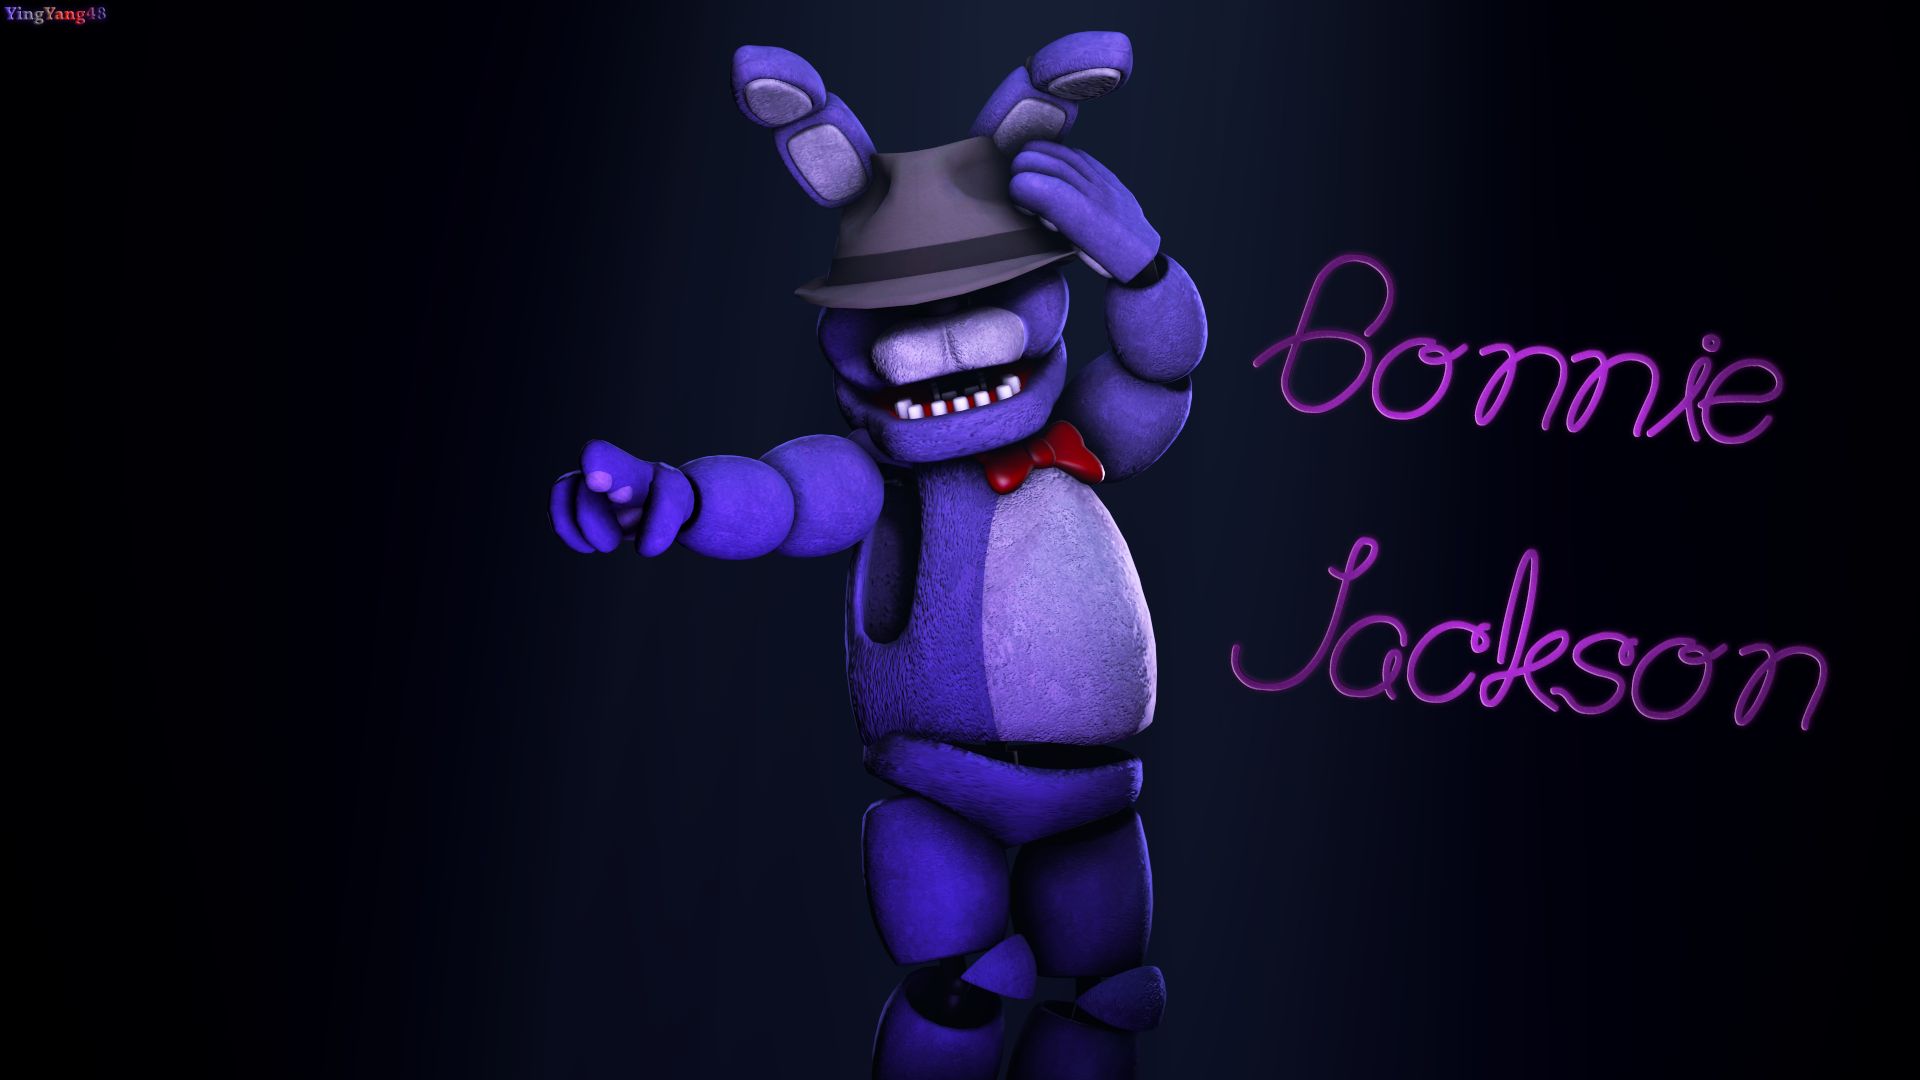 Wallpapers for FNAF Five Nights at Freddy's Free by Myrosia Pabyrivska